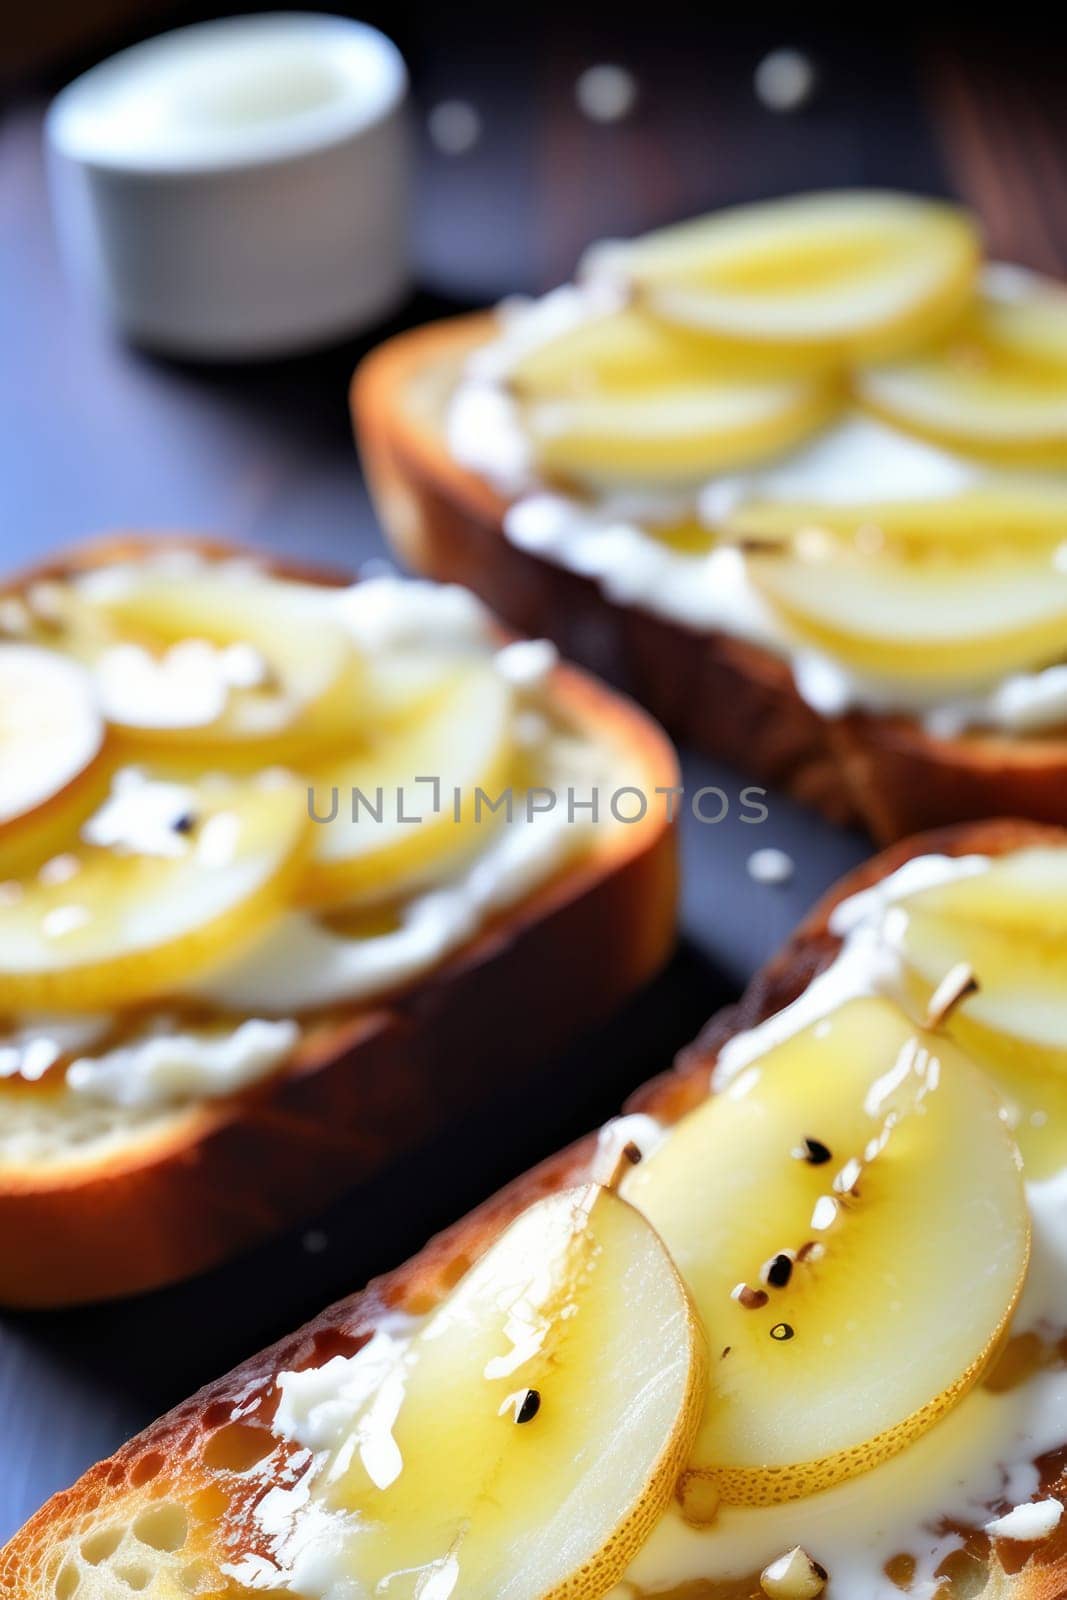 Bruschetta with caramelized pears and cheese, delicious crostini for gourmet breakfast, brunch or lunch, close up, vertical image